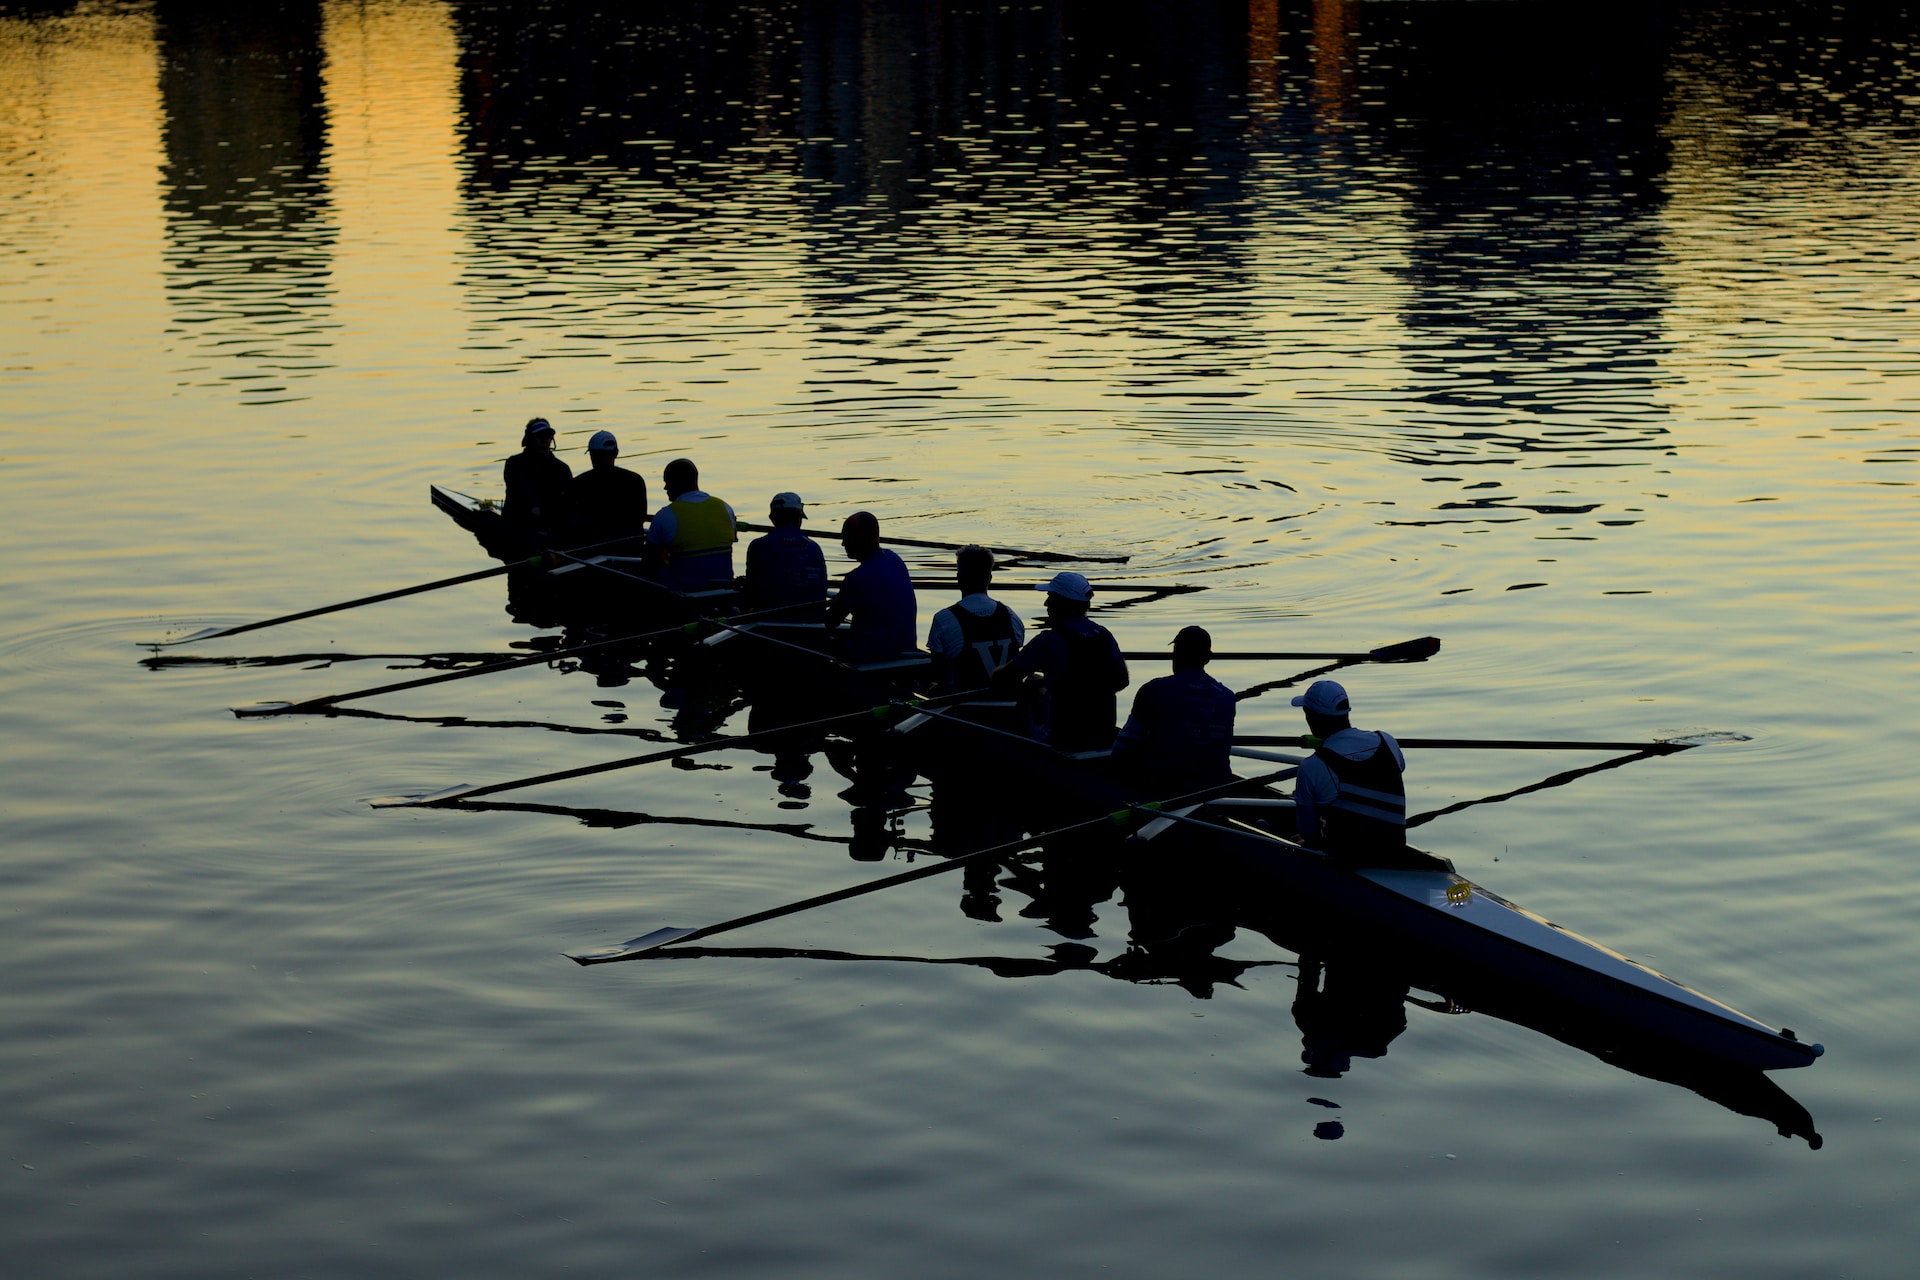 Promoting health promotion, and rowing upstream together. Photo by Mitchell Luo on Unsplash